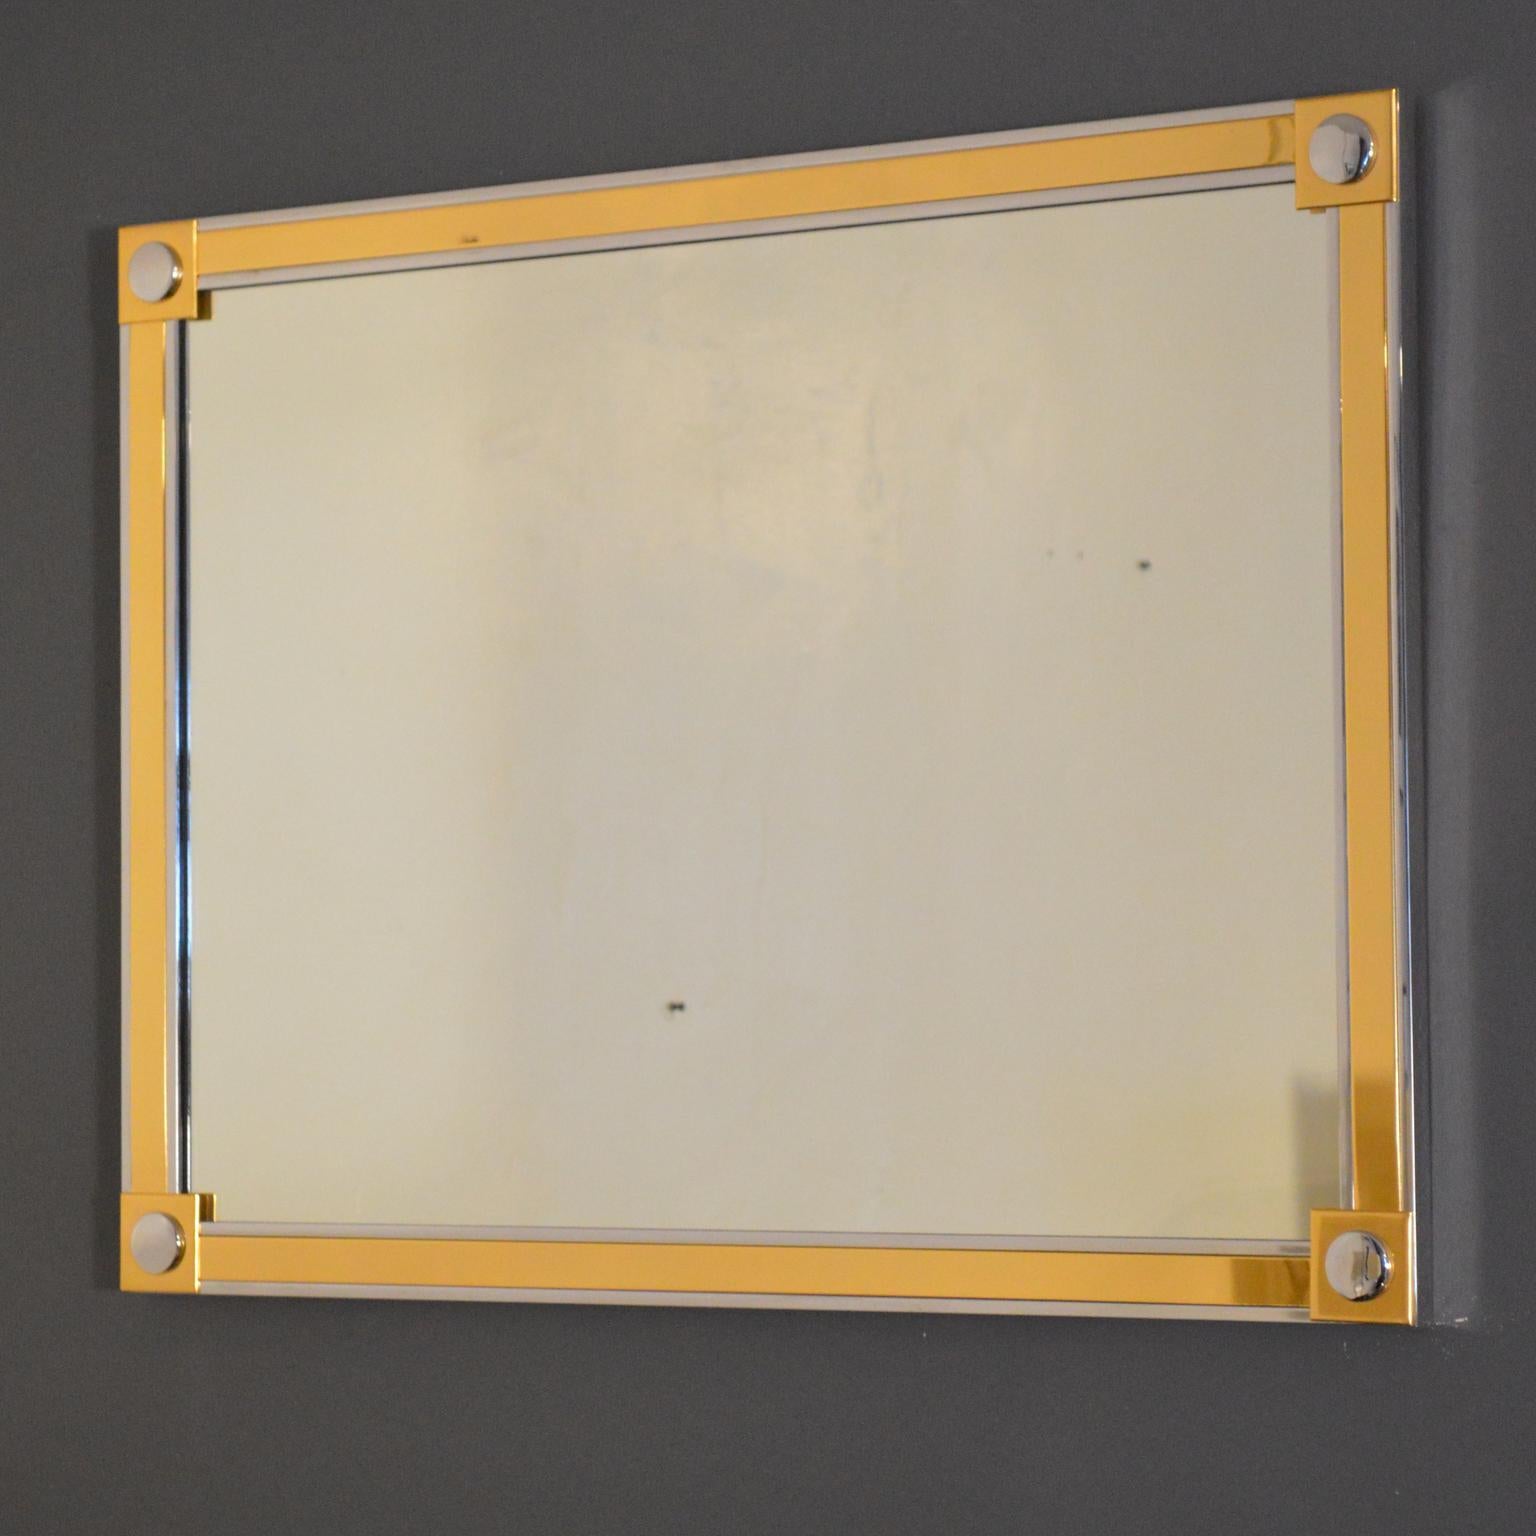 High quality mirror, clear, heavy, flaw-free, in steel frame plated with brass and chrome. Heavy-duty mounting hardware and symmetric design permit hanging in vertical and horizontal orientations. Similar in aesthetic and construction to Romeo Rega